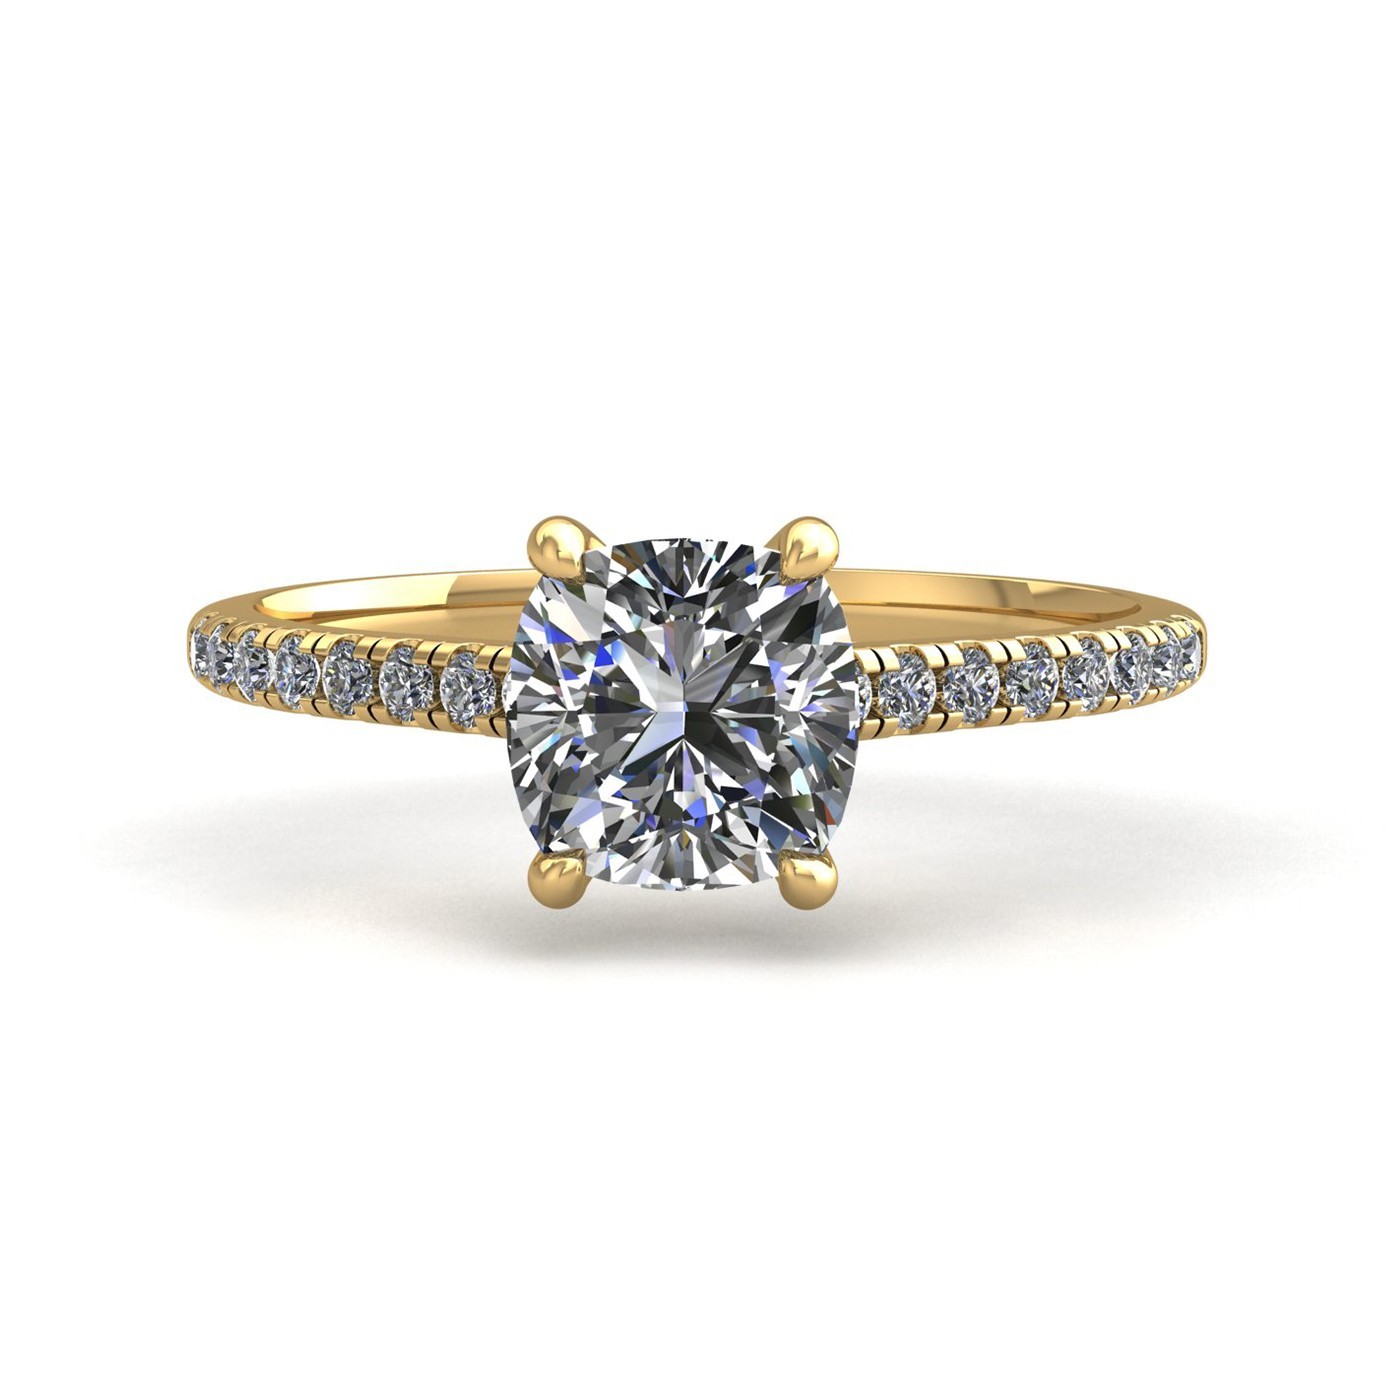 18k yellow gold 1.20ct 4 prongs cushion cut diamond engagement ring with whisper thin pavÉ set band Photos & images